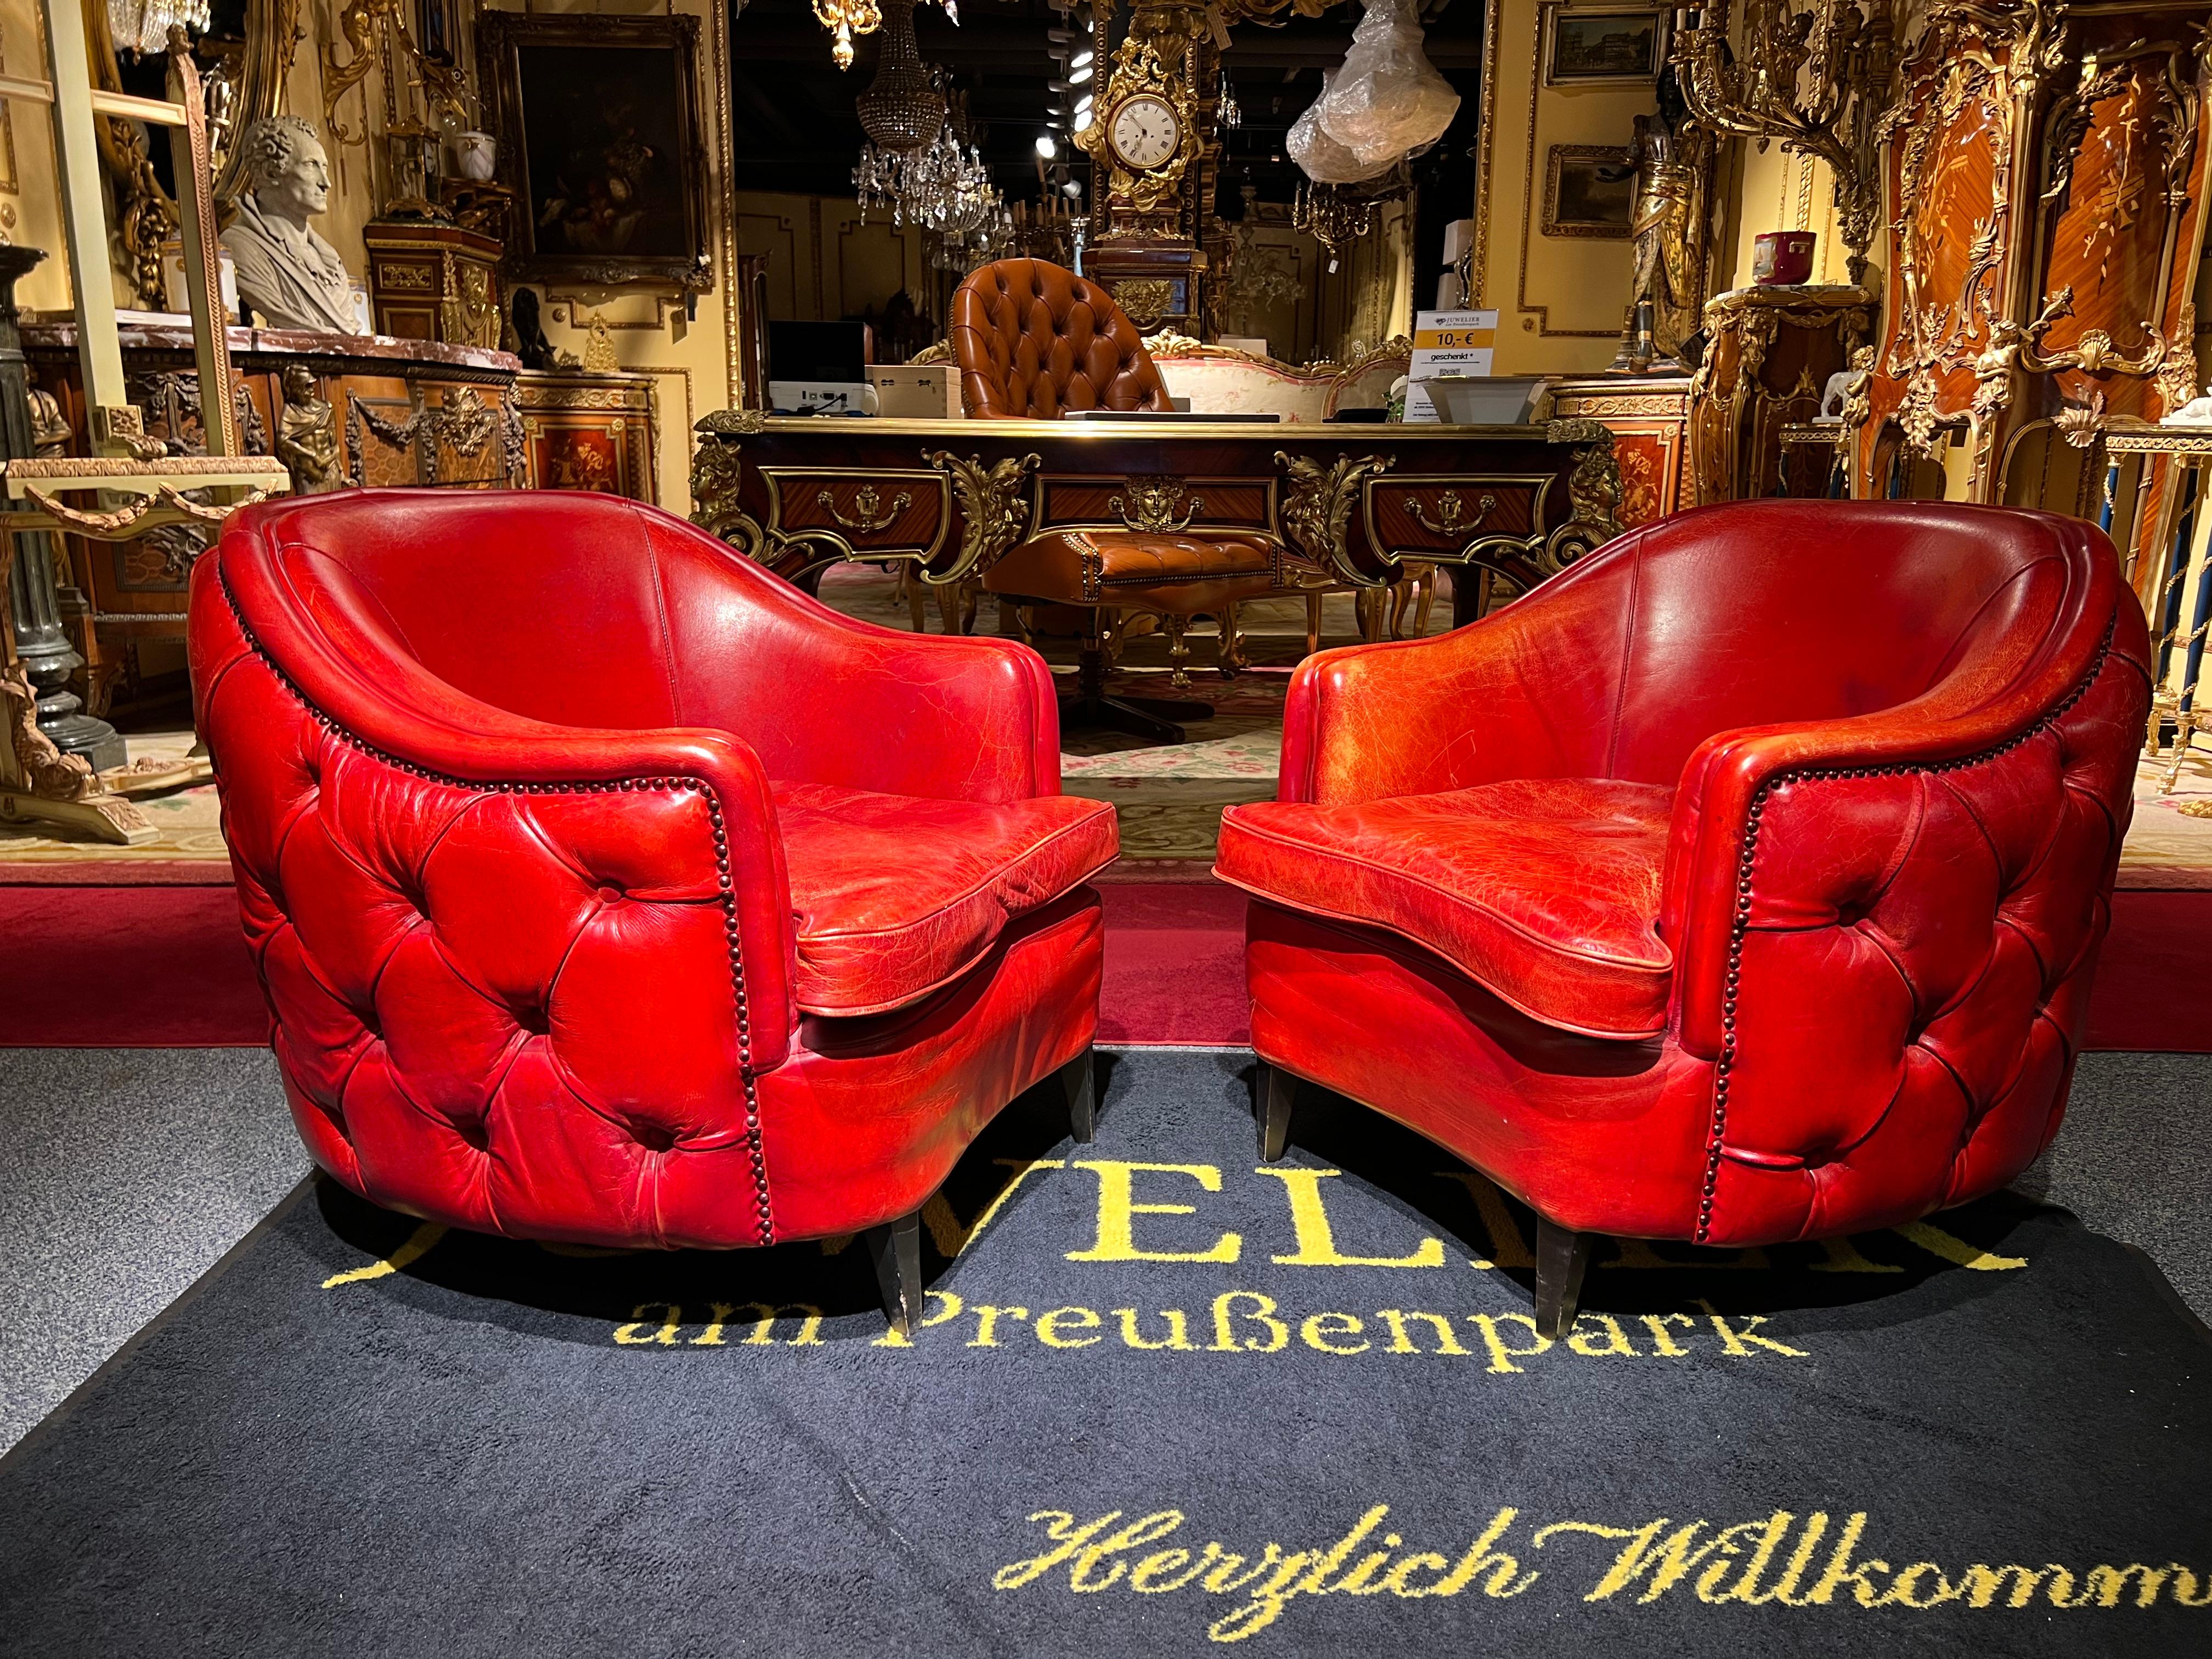 We are delighted to offer for sale this lovely original hand dyed Oxblood Red leather Chesterfield club armchairs

A good looking and iconic piece of English furniture. Known the world over as one of the most sophisticated club armchairs ever